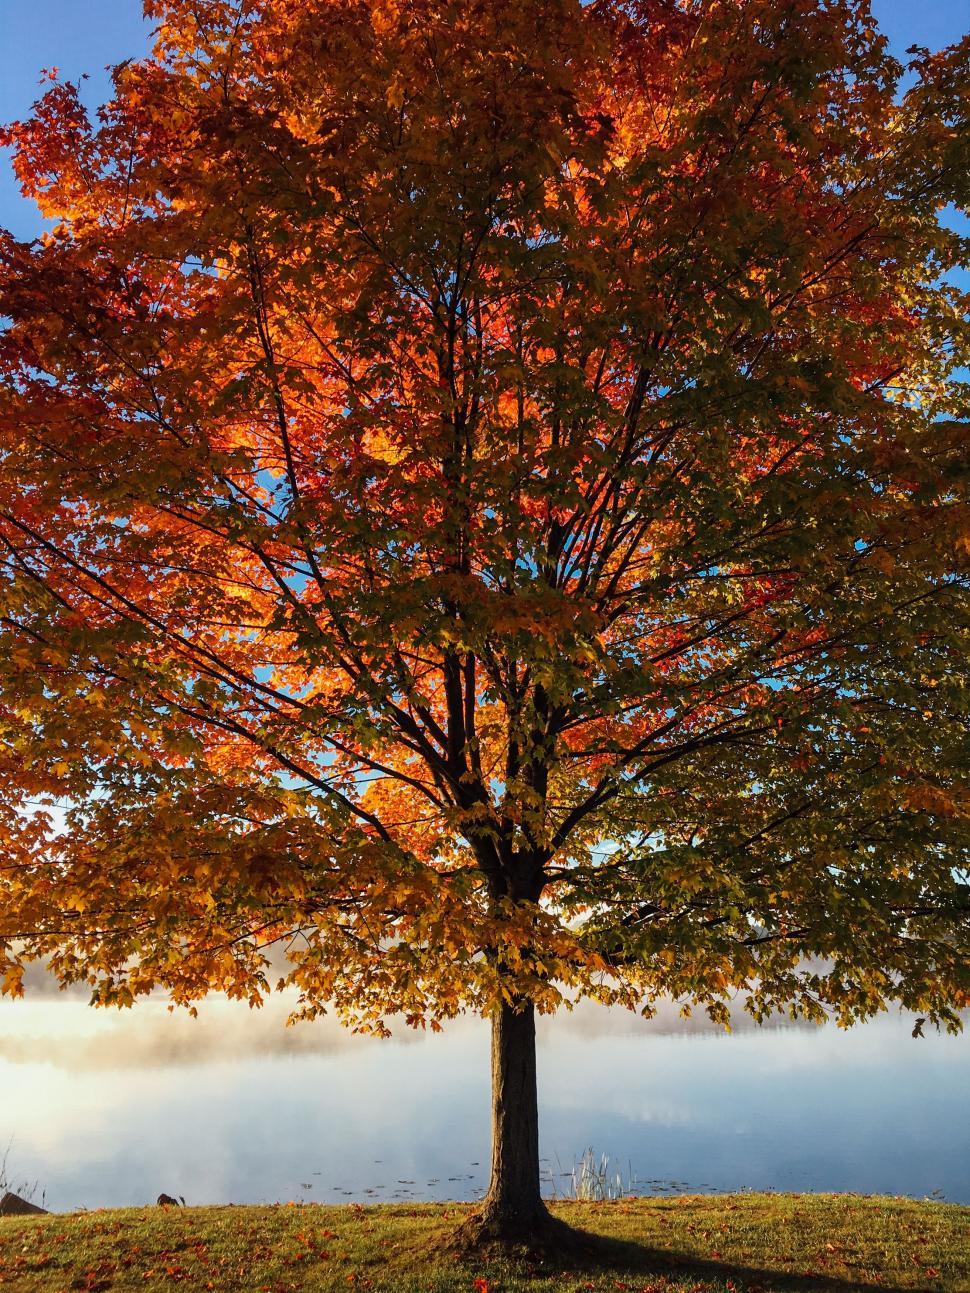 Free Image of Tree With Orange Leaves in the Fall 